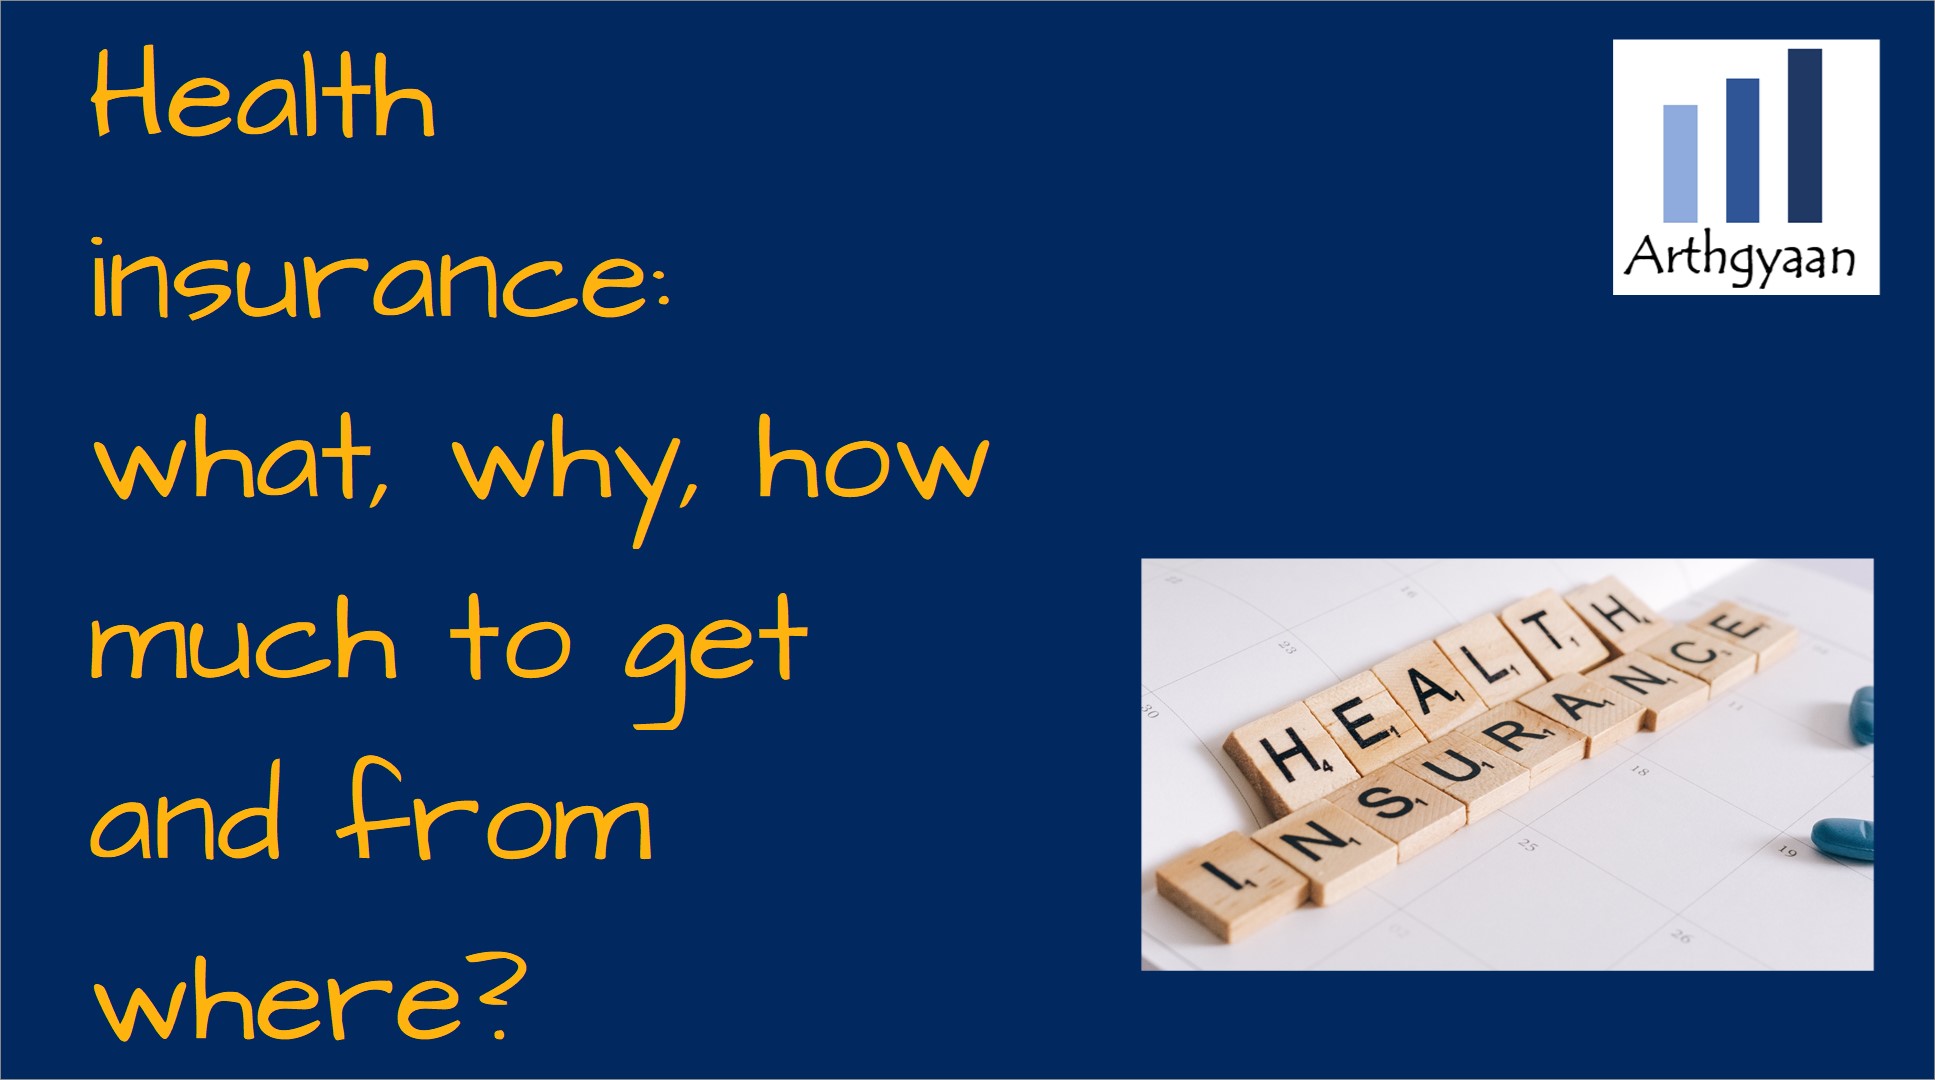 Health insurance: what, why, how much to get and from where?